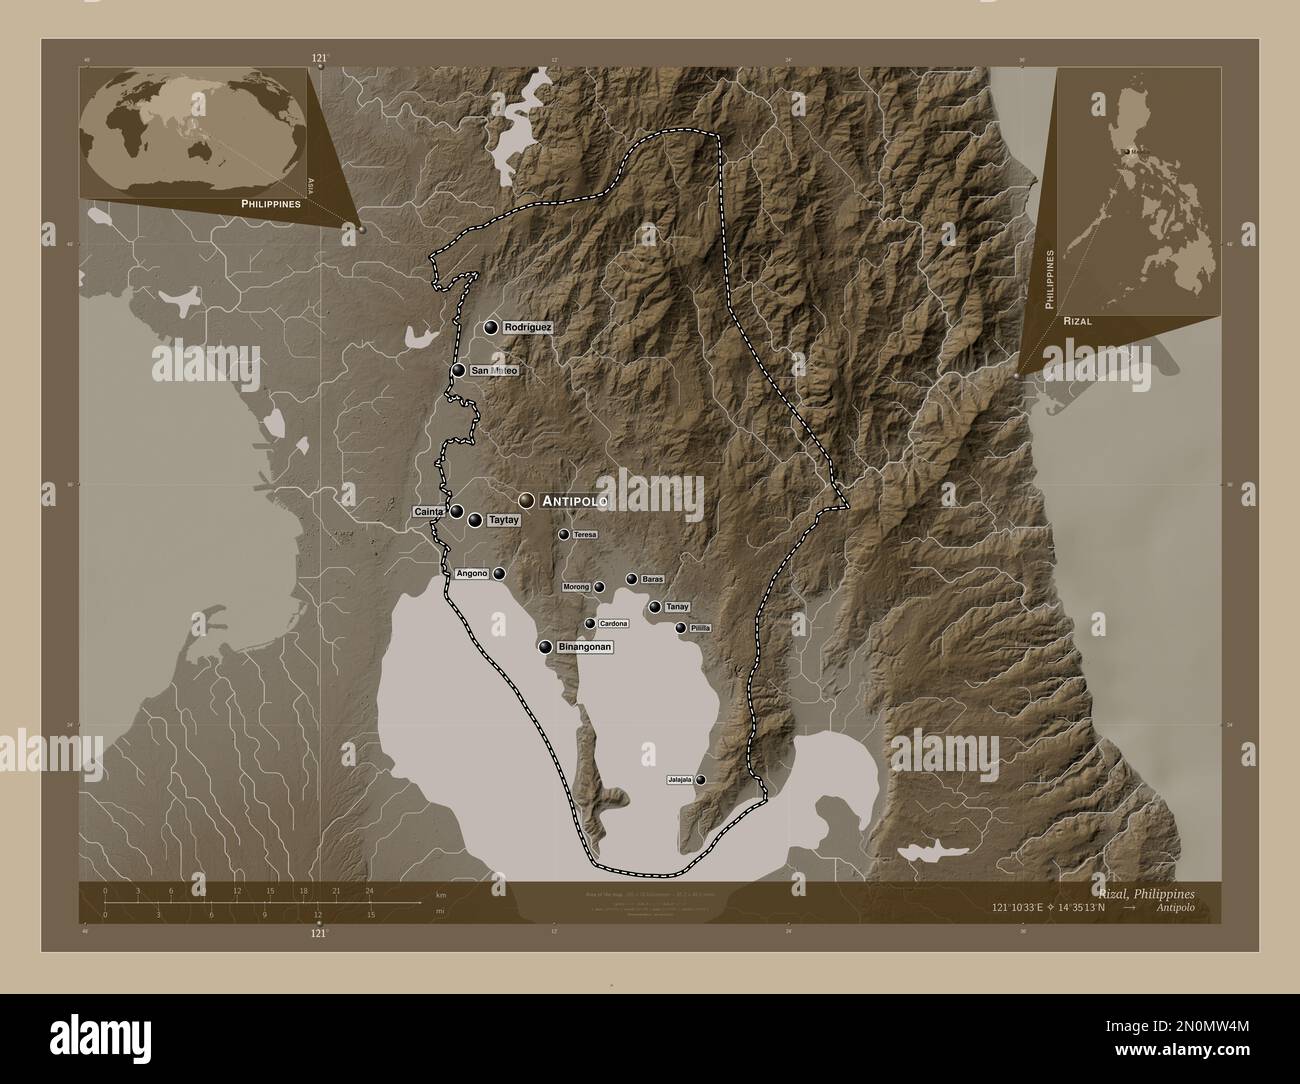 Rizal, province of Philippines. Elevation map colored in sepia tones with lakes and rivers. Locations and names of major cities of the region. Corner Stock Photo